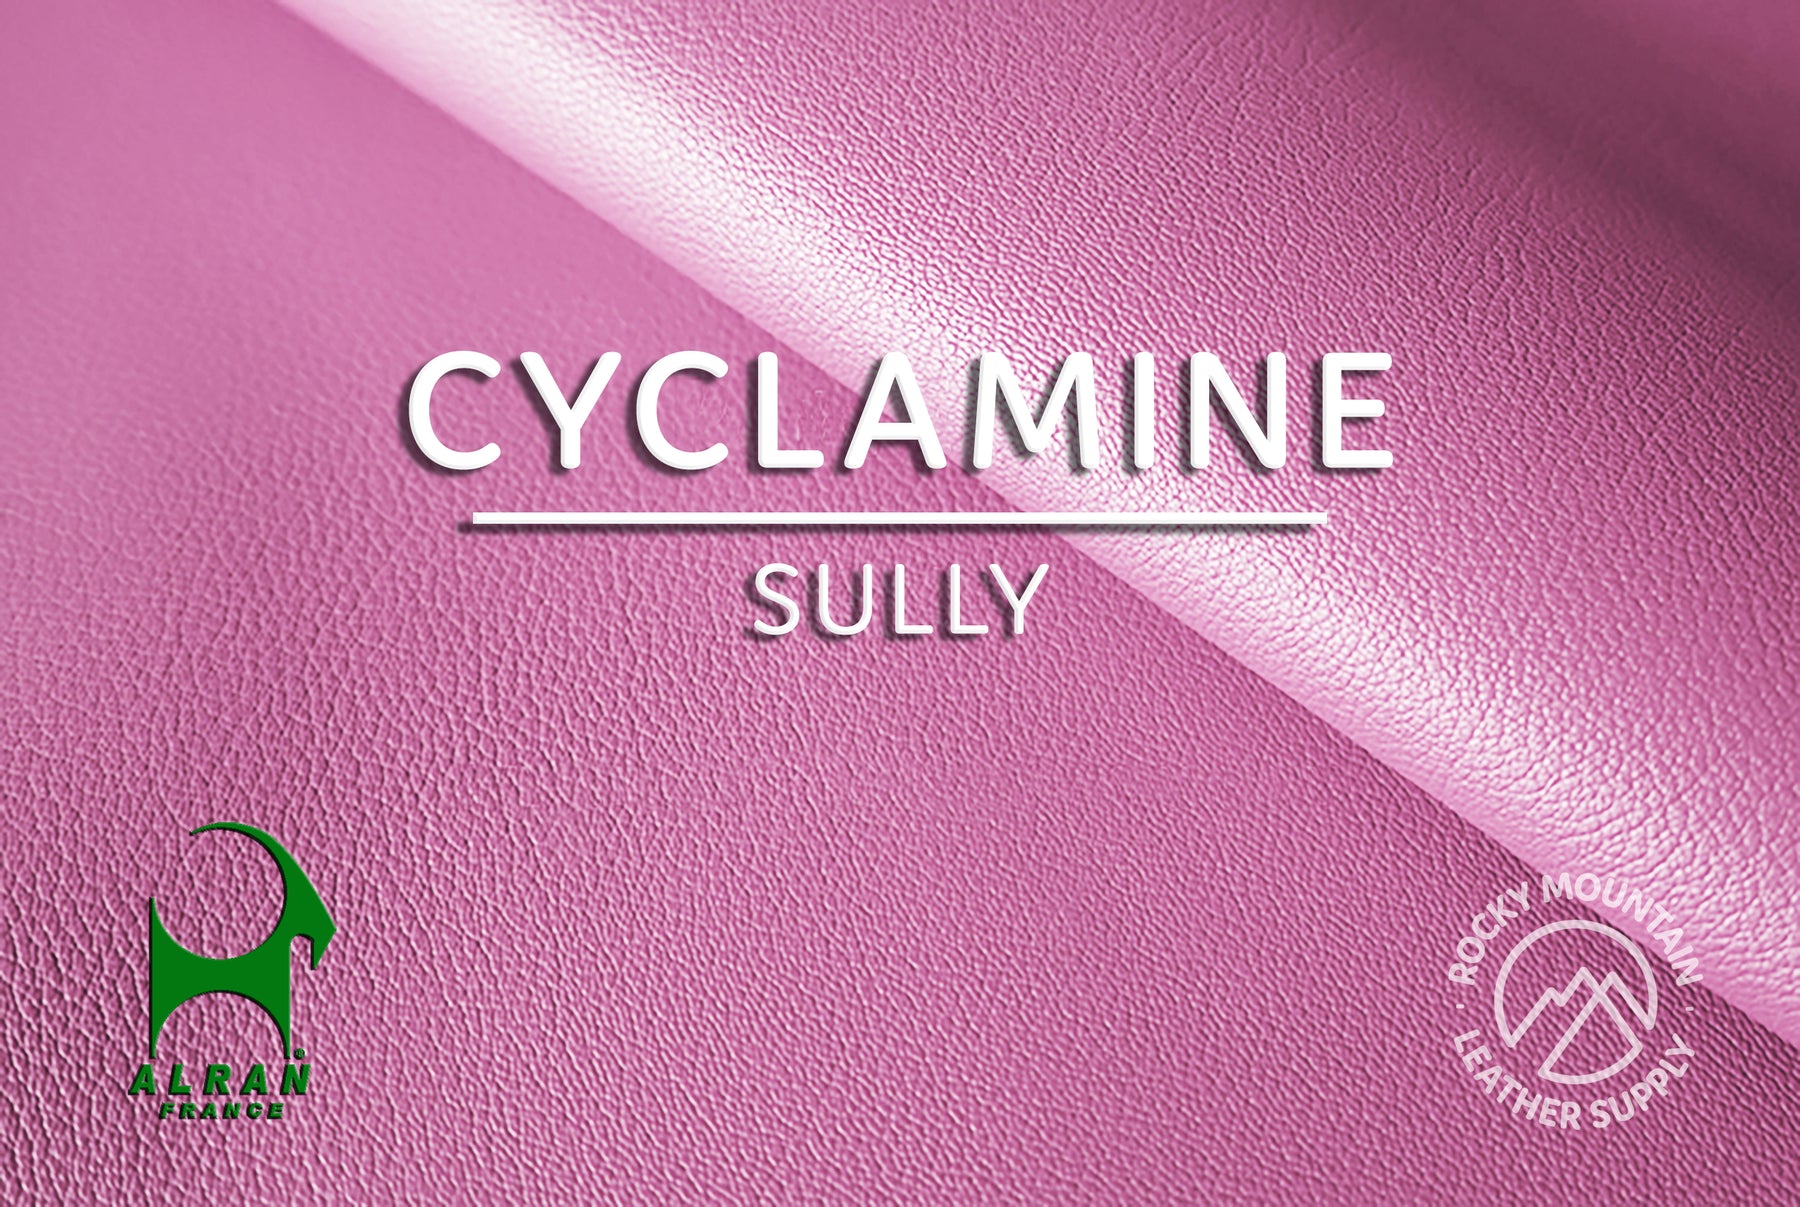 Alran 🇫🇷 - "Sully" Chevre Chagrin - Goat Leather (HIDES - VIOLETS/PINKS)